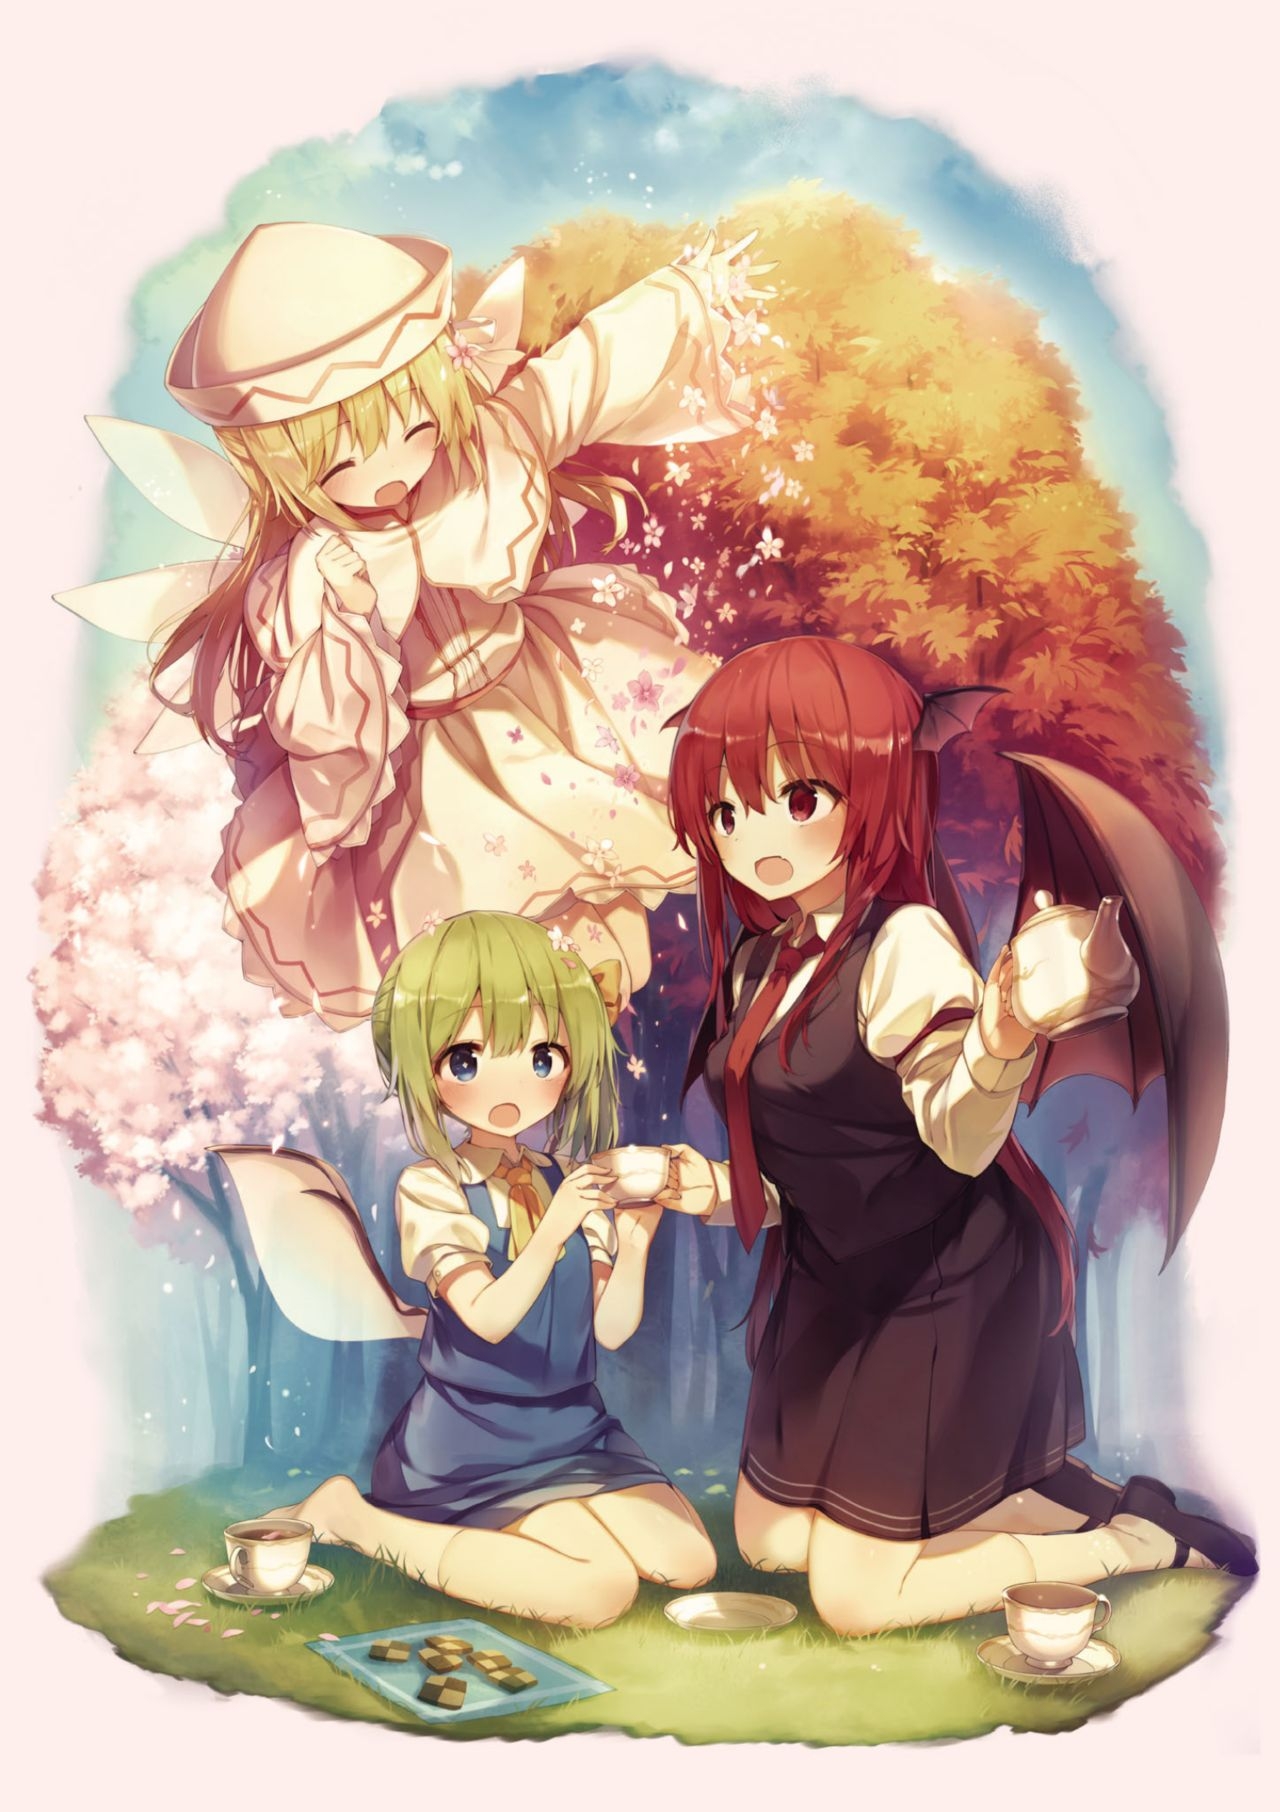 [Zun]Touhou Project Who's Who of Humans & Youkai - Dusk Edition illustrations 8